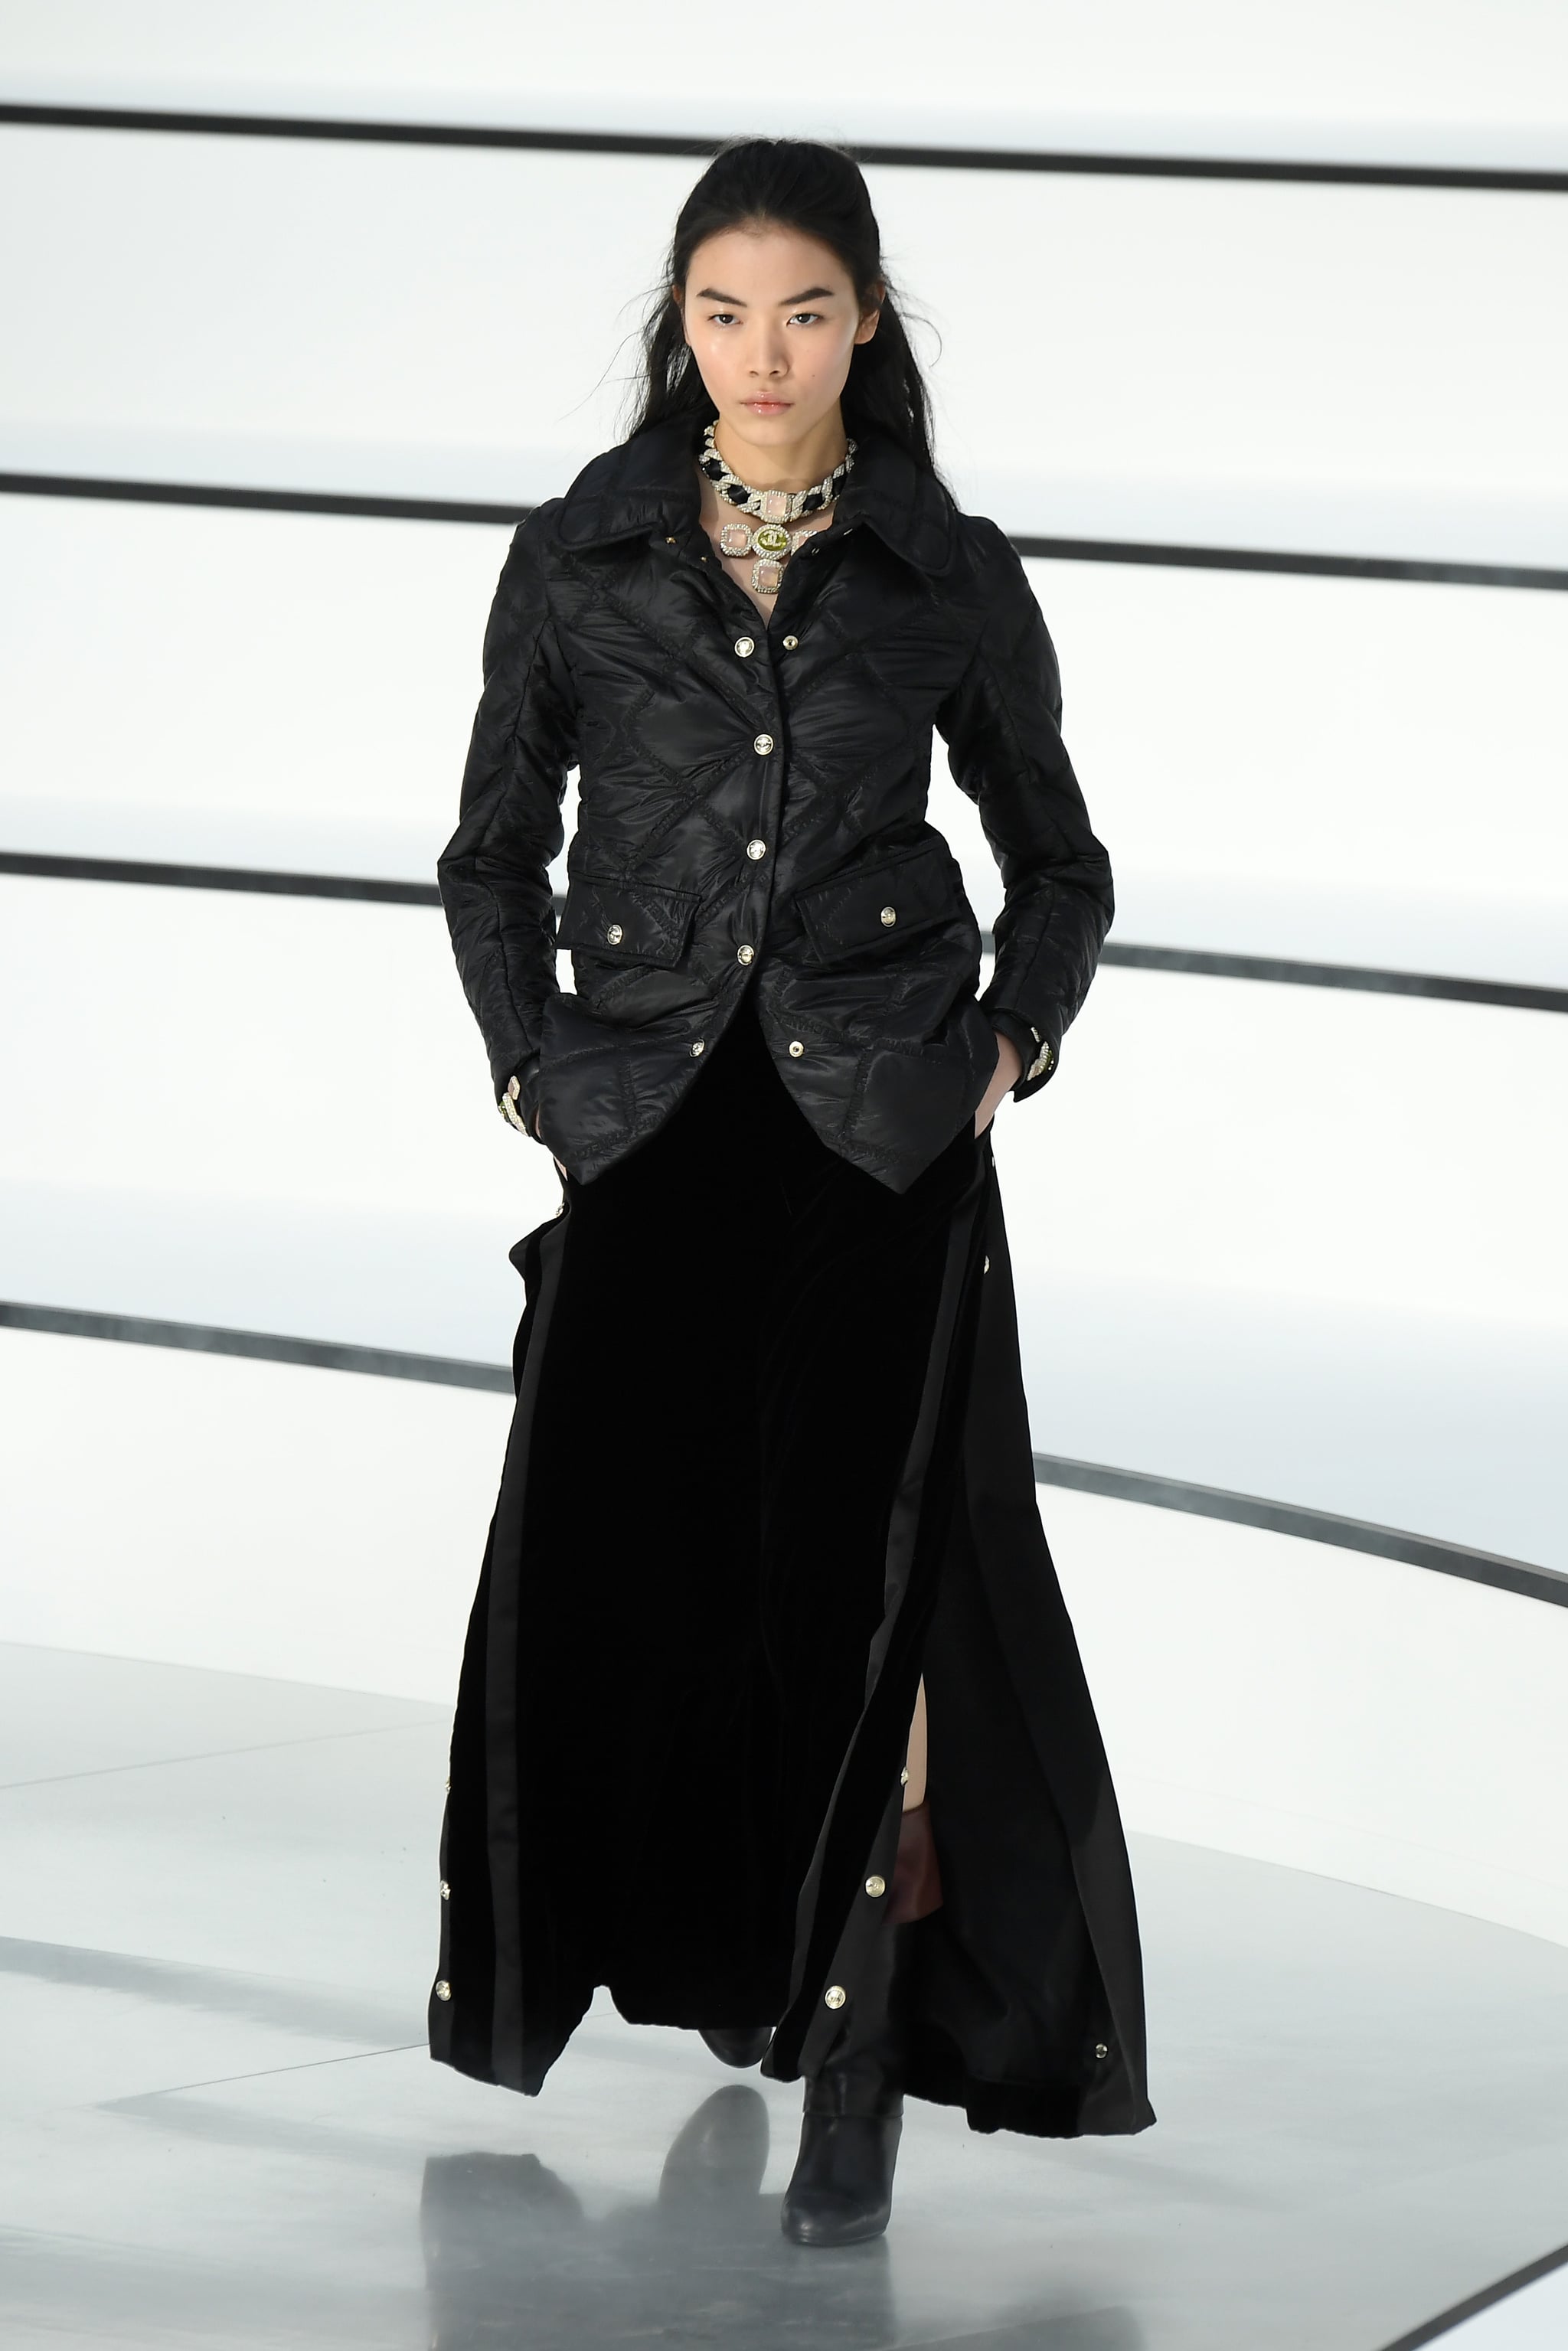 Chanel Fall/Winter 2020, Chanel's Fall 2020 Collection Resurrected Karl  Lagerfeld's Iconic Designs From 1994